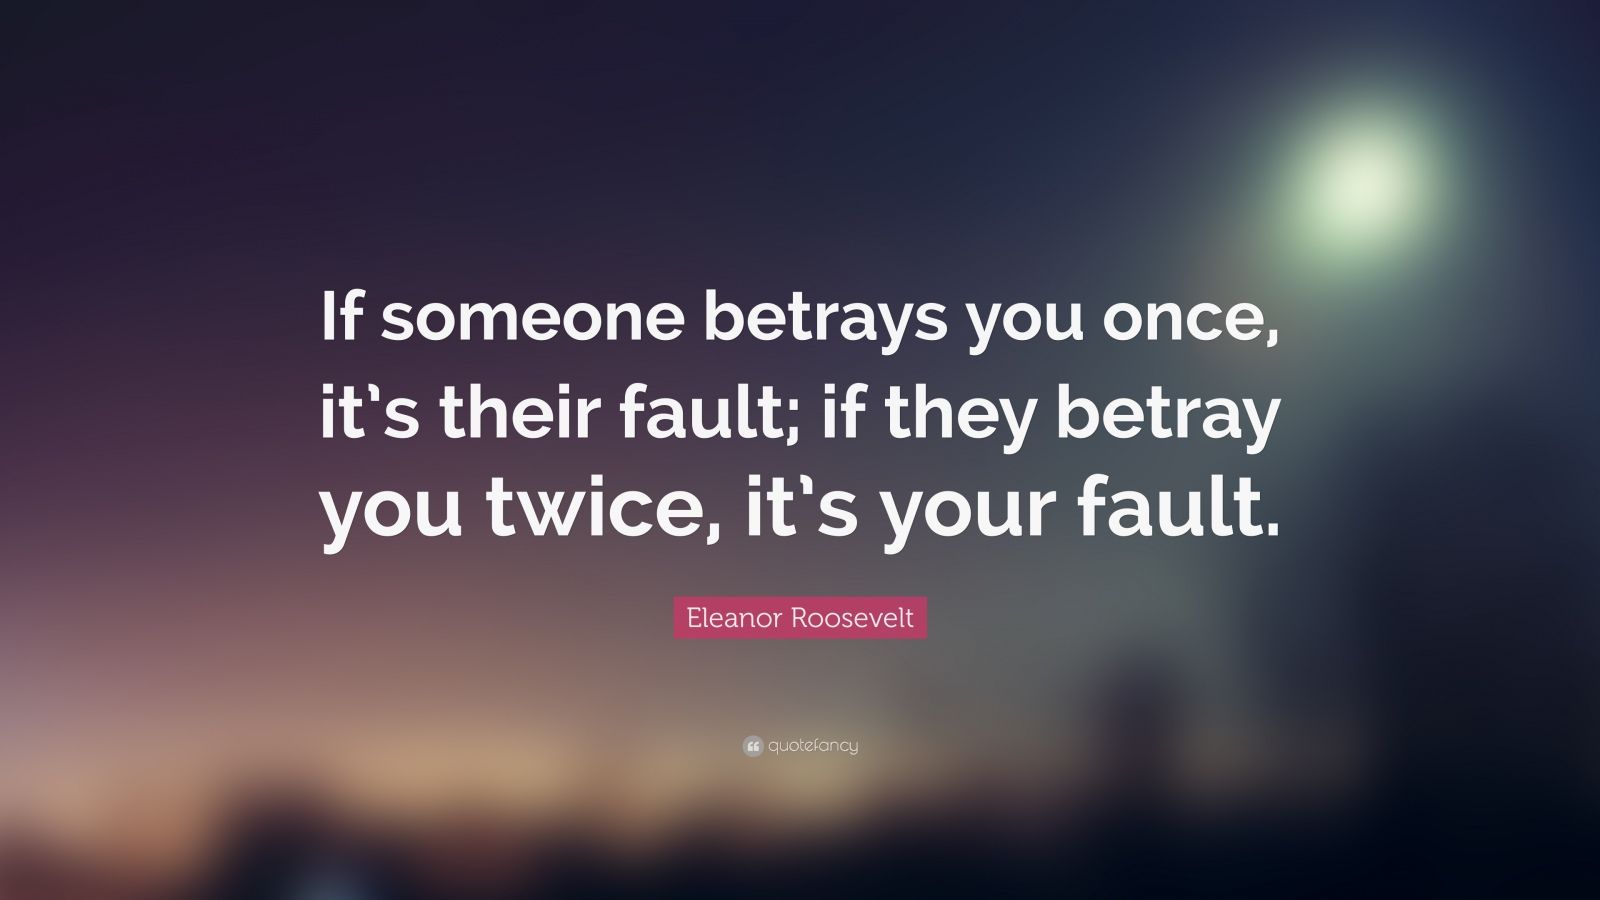 Eleanor Roosevelt Quote: “If someone betrays you once, it’s their fault ...